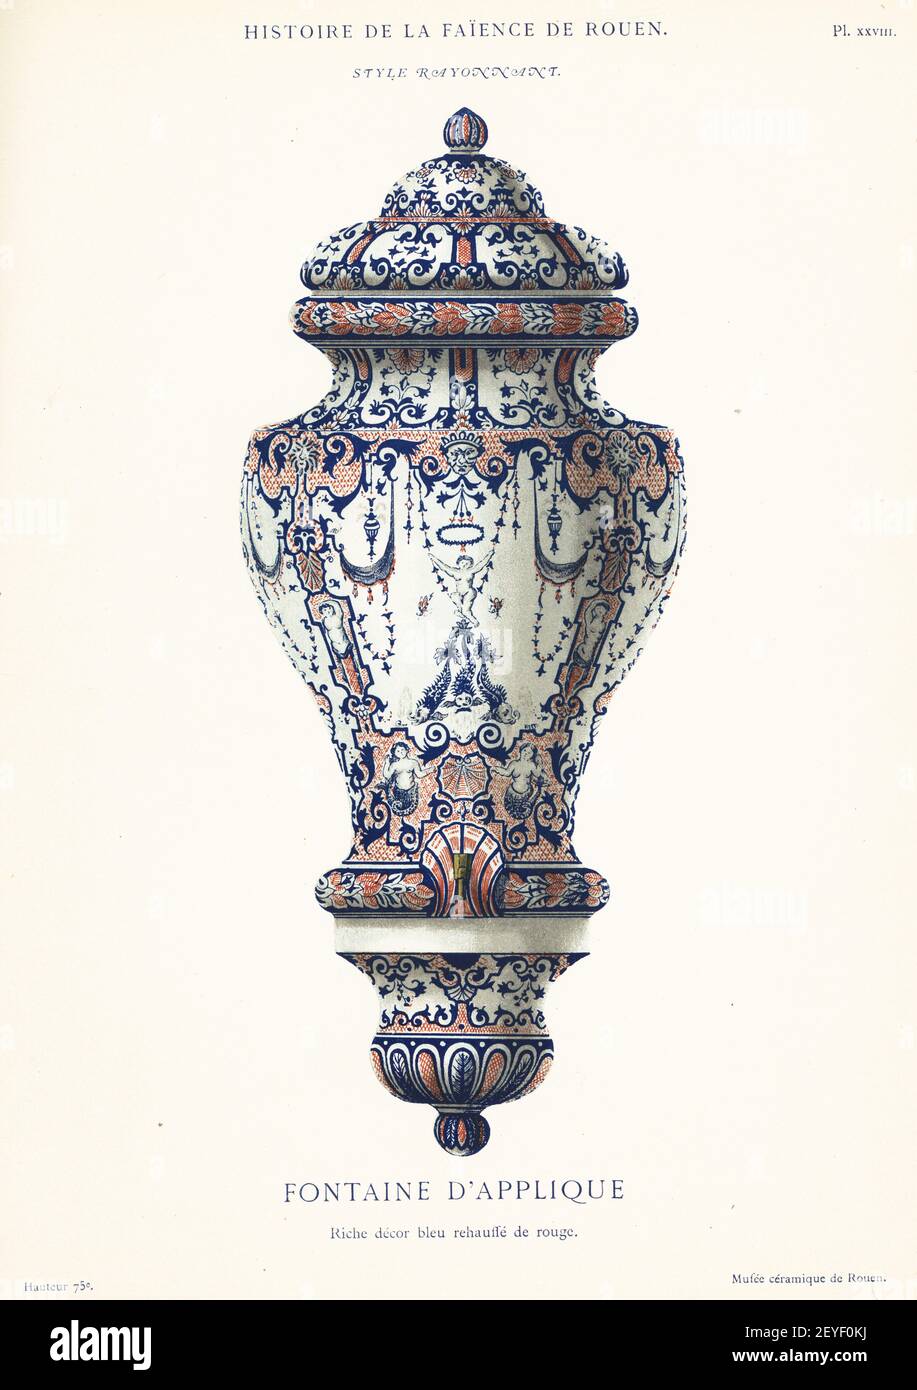 Wall-mounted fountain, blue and red festoon style. Fontaine d'applique, style rayonnant. Chromolithograph after an illustration by Emilie Pottier from Andre Pottier's Histoire de la Faience de Rouen, Auguste le Brument, Rouen, 1870. Stock Photo